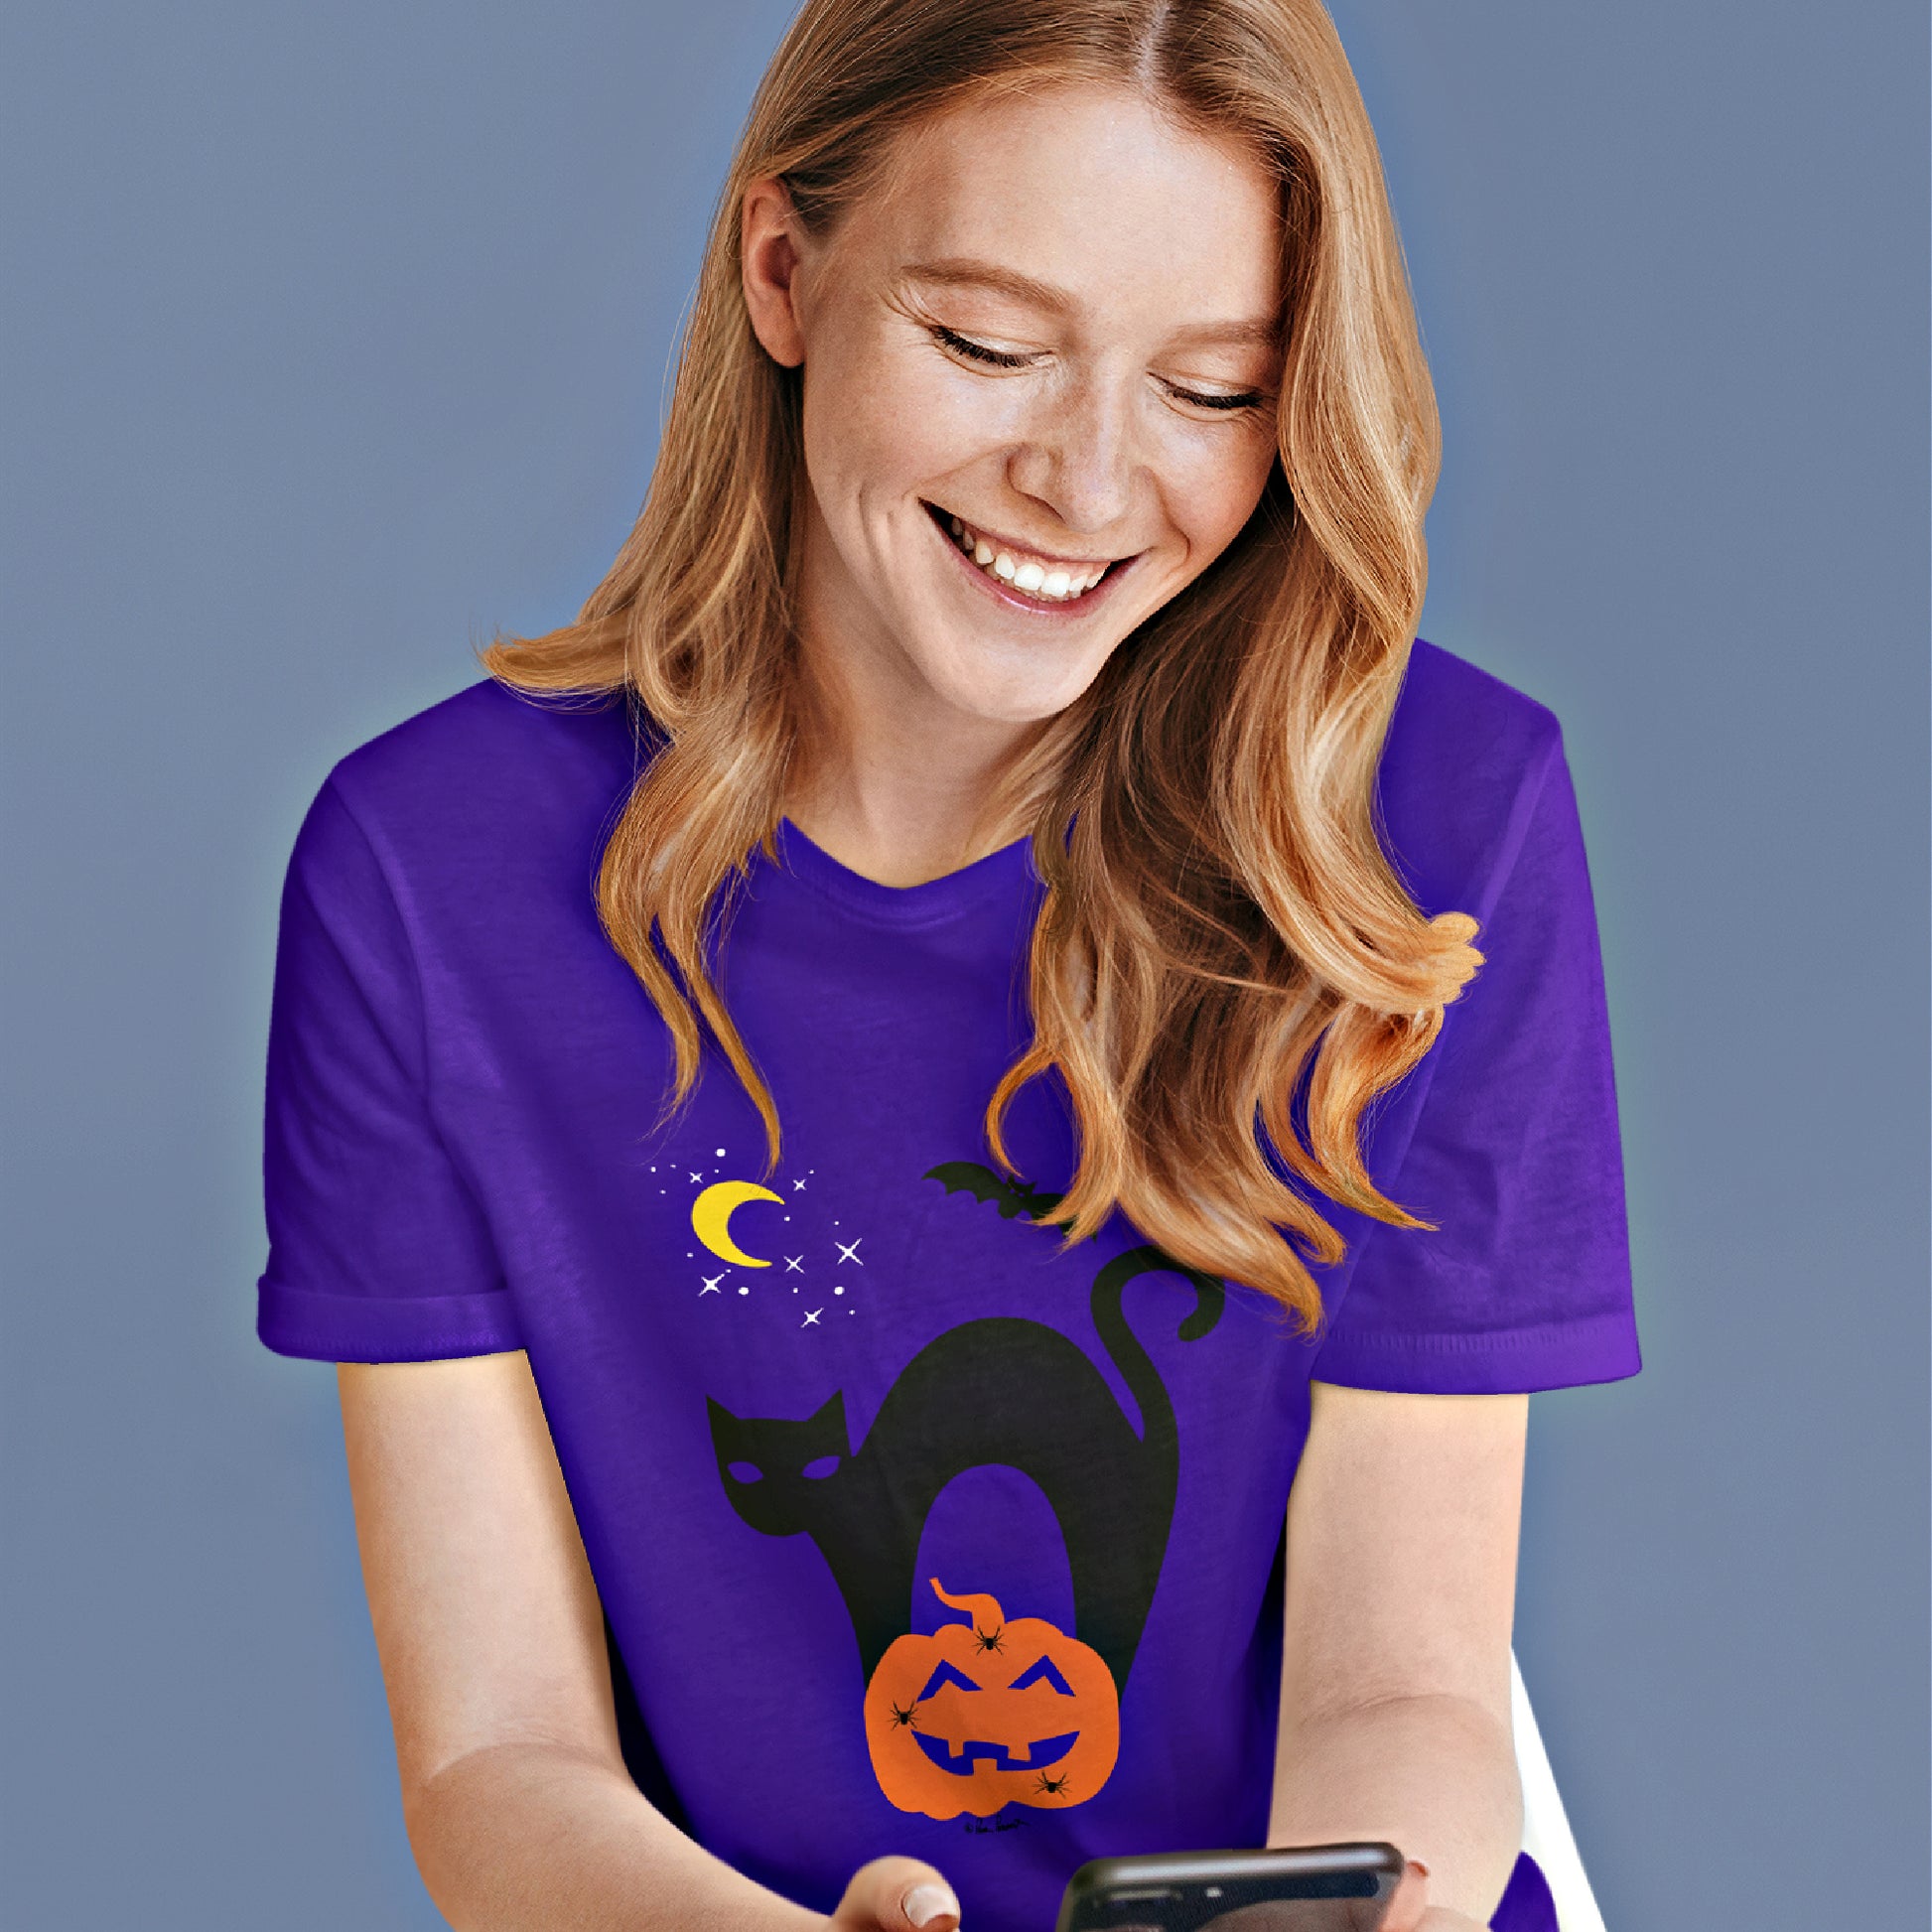 Mock up of a woman reading a message on her mobile phone while wearing our purple t-shirt